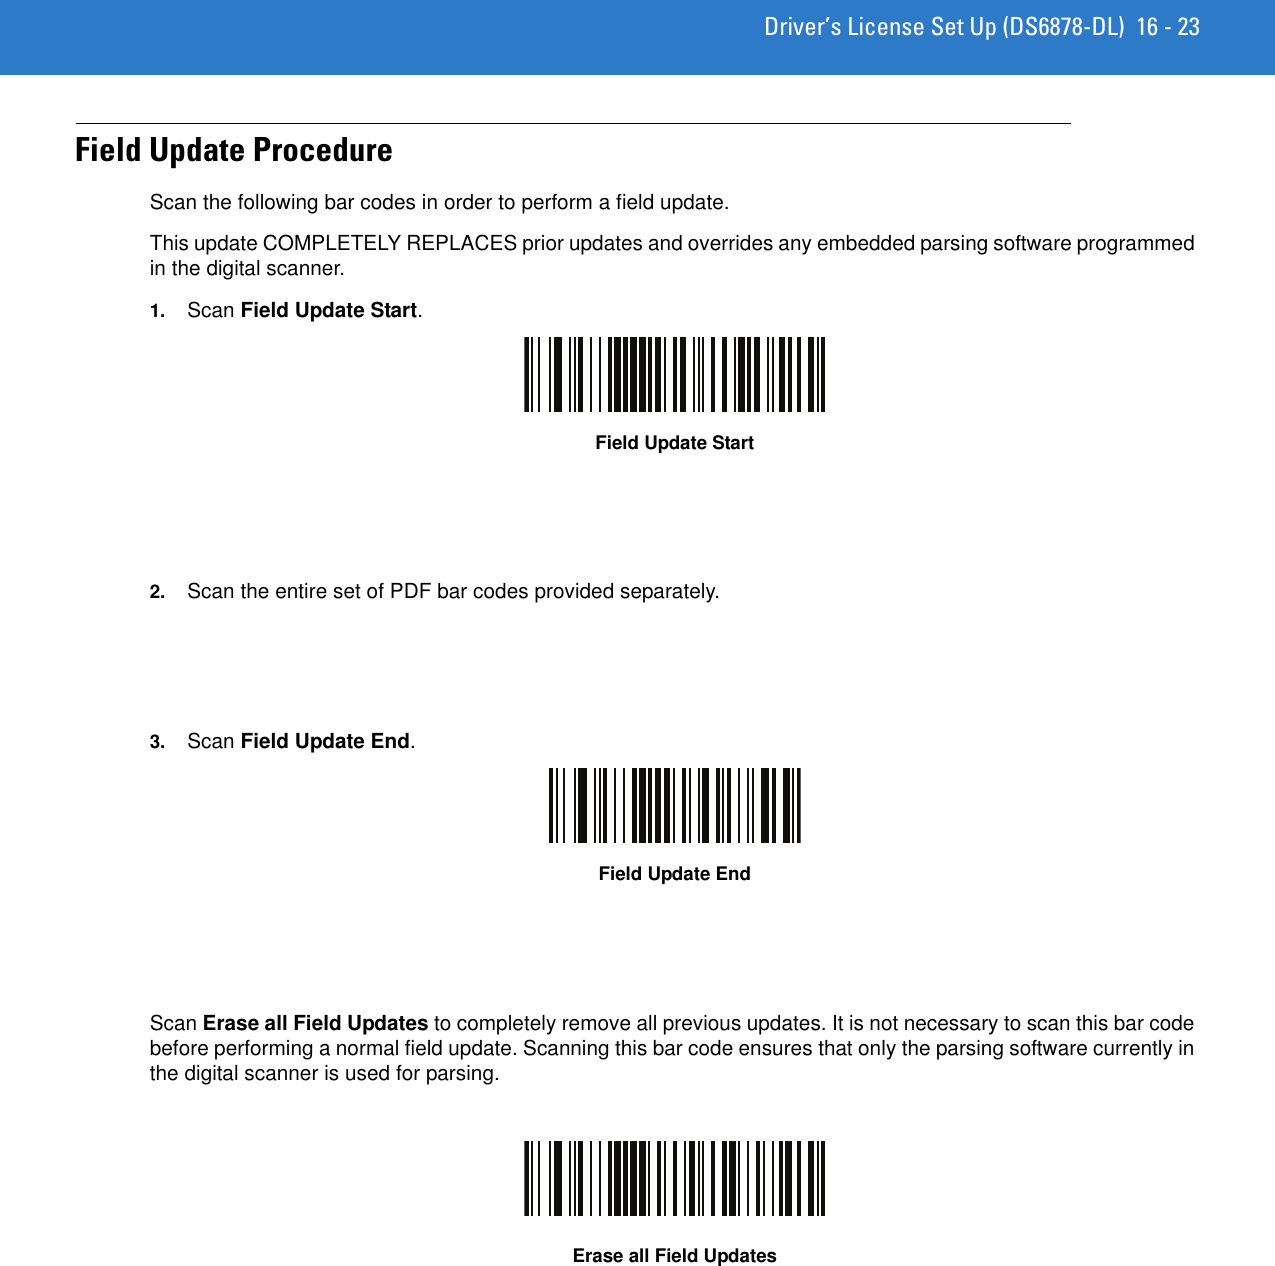 Driver’s License Set Up (DS6878-DL) 16 - 23Field Update ProcedureScan the following bar codes in order to perform a field update.This update COMPLETELY REPLACES prior updates and overrides any embedded parsing software programmed in the digital scanner.1. Scan Field Update Start.Field Update Start2. Scan the entire set of PDF bar codes provided separately.3. Scan Field Update End.Field Update EndScan Erase all Field Updates to completely remove all previous updates. It is not necessary to scan this bar code before performing a normal field update. Scanning this bar code ensures that only the parsing software currently in the digital scanner is used for parsing.Erase all Field Updates